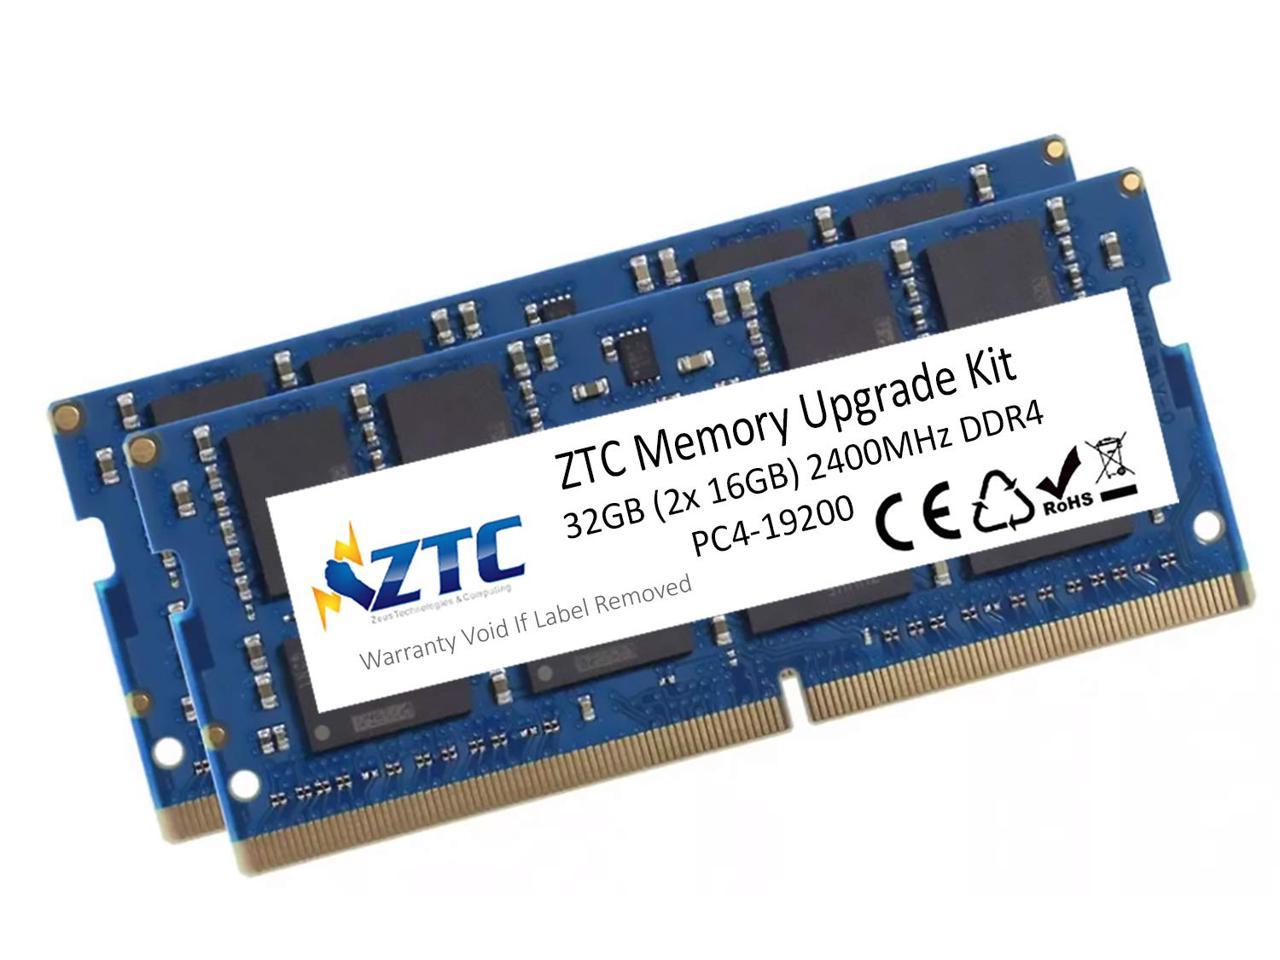 ZTC 32GB (2X 16GB) DDR4 PC4-19200 2400MHz SO-DIMM 260Pin CL17 Memory Upgrade Kit for Mac Mini (Late 2018), 27" and 21.5" iMac (Mid 2017), and PCs That utilize PC4-19200